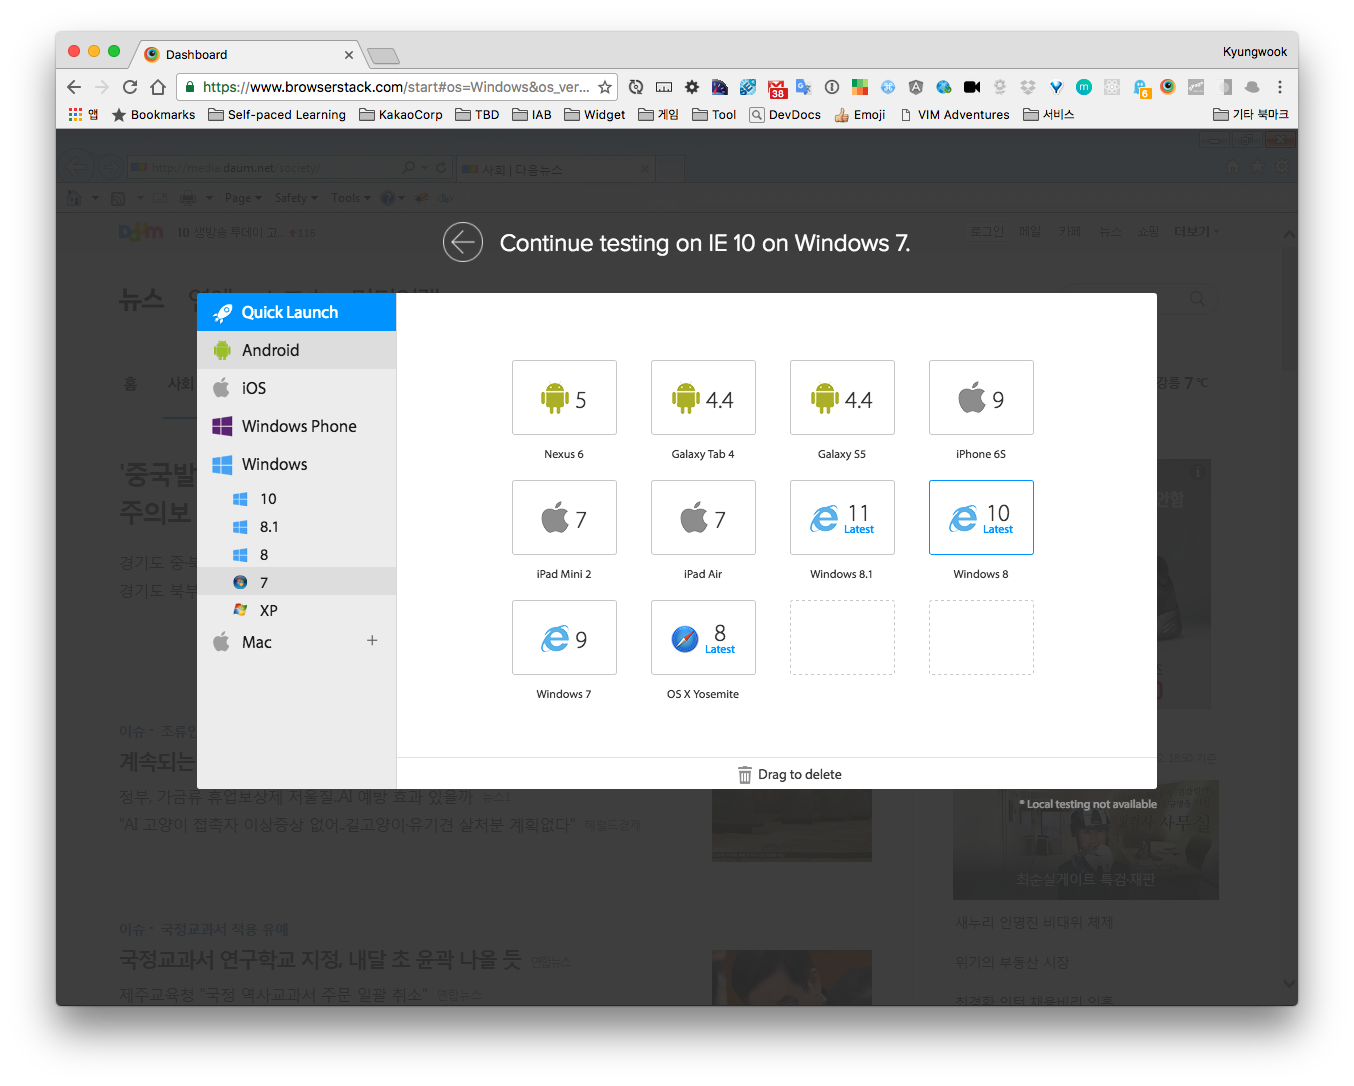 browserstack-live-quicklaunch